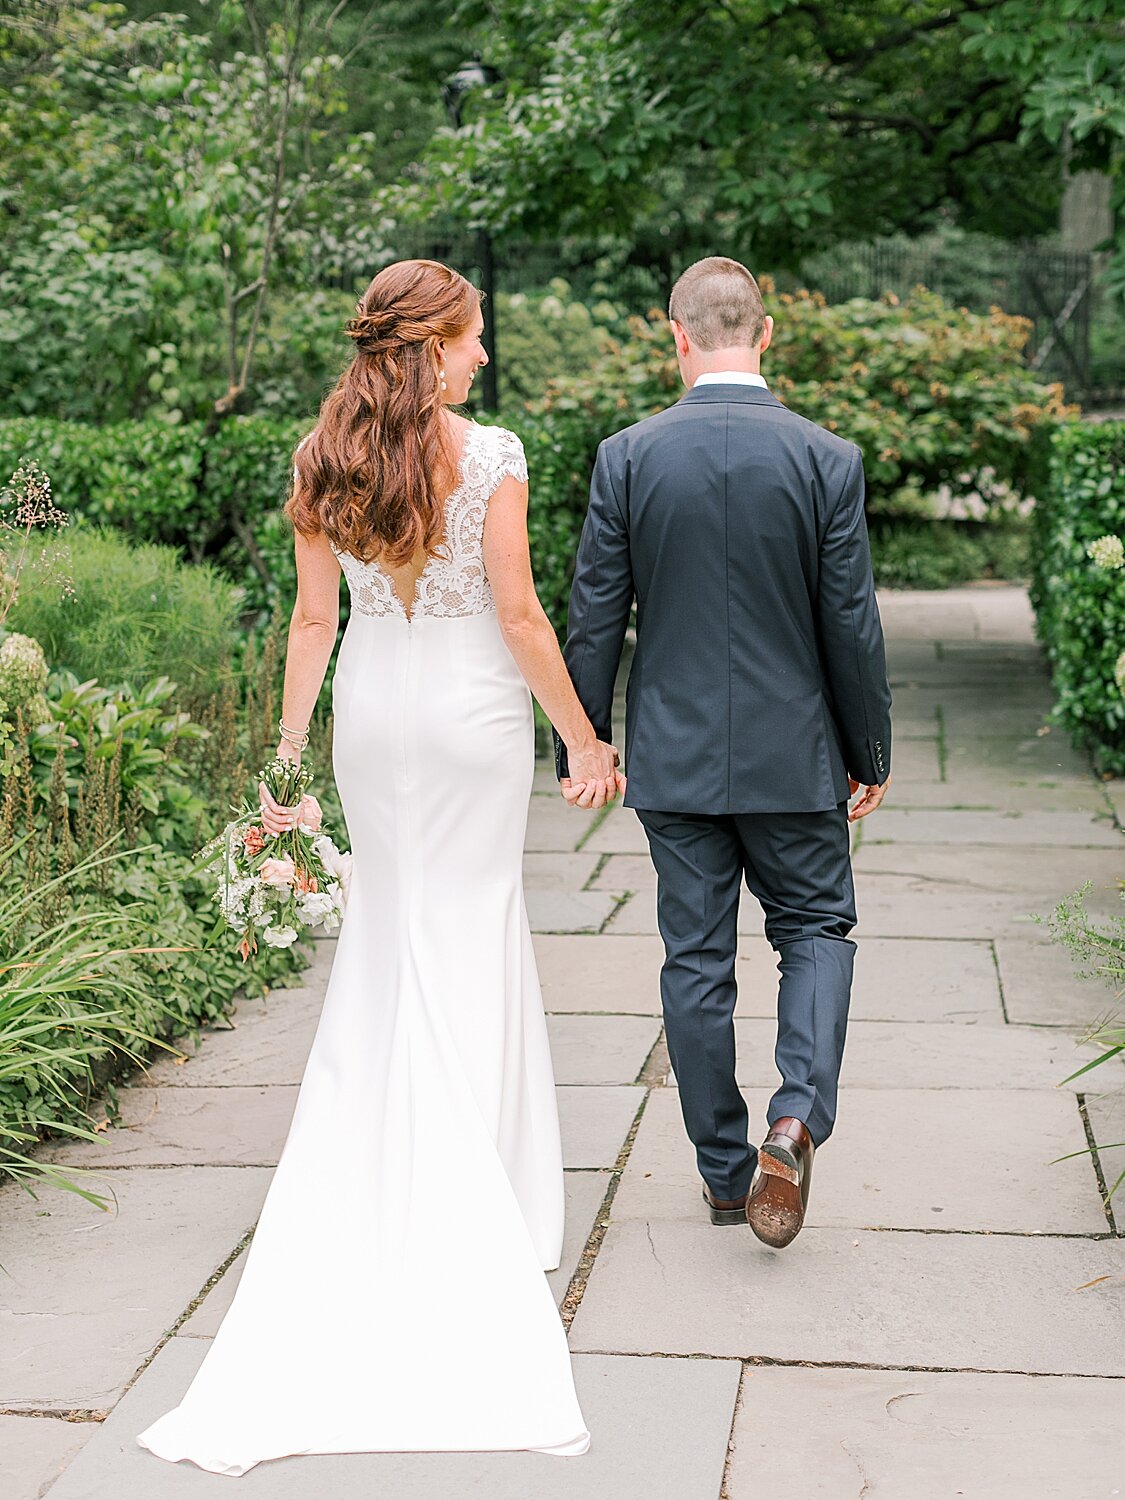 bride and groom take a walk together | Asher Gardner Photography | Elopement at the Central Park Conservatory Gardens